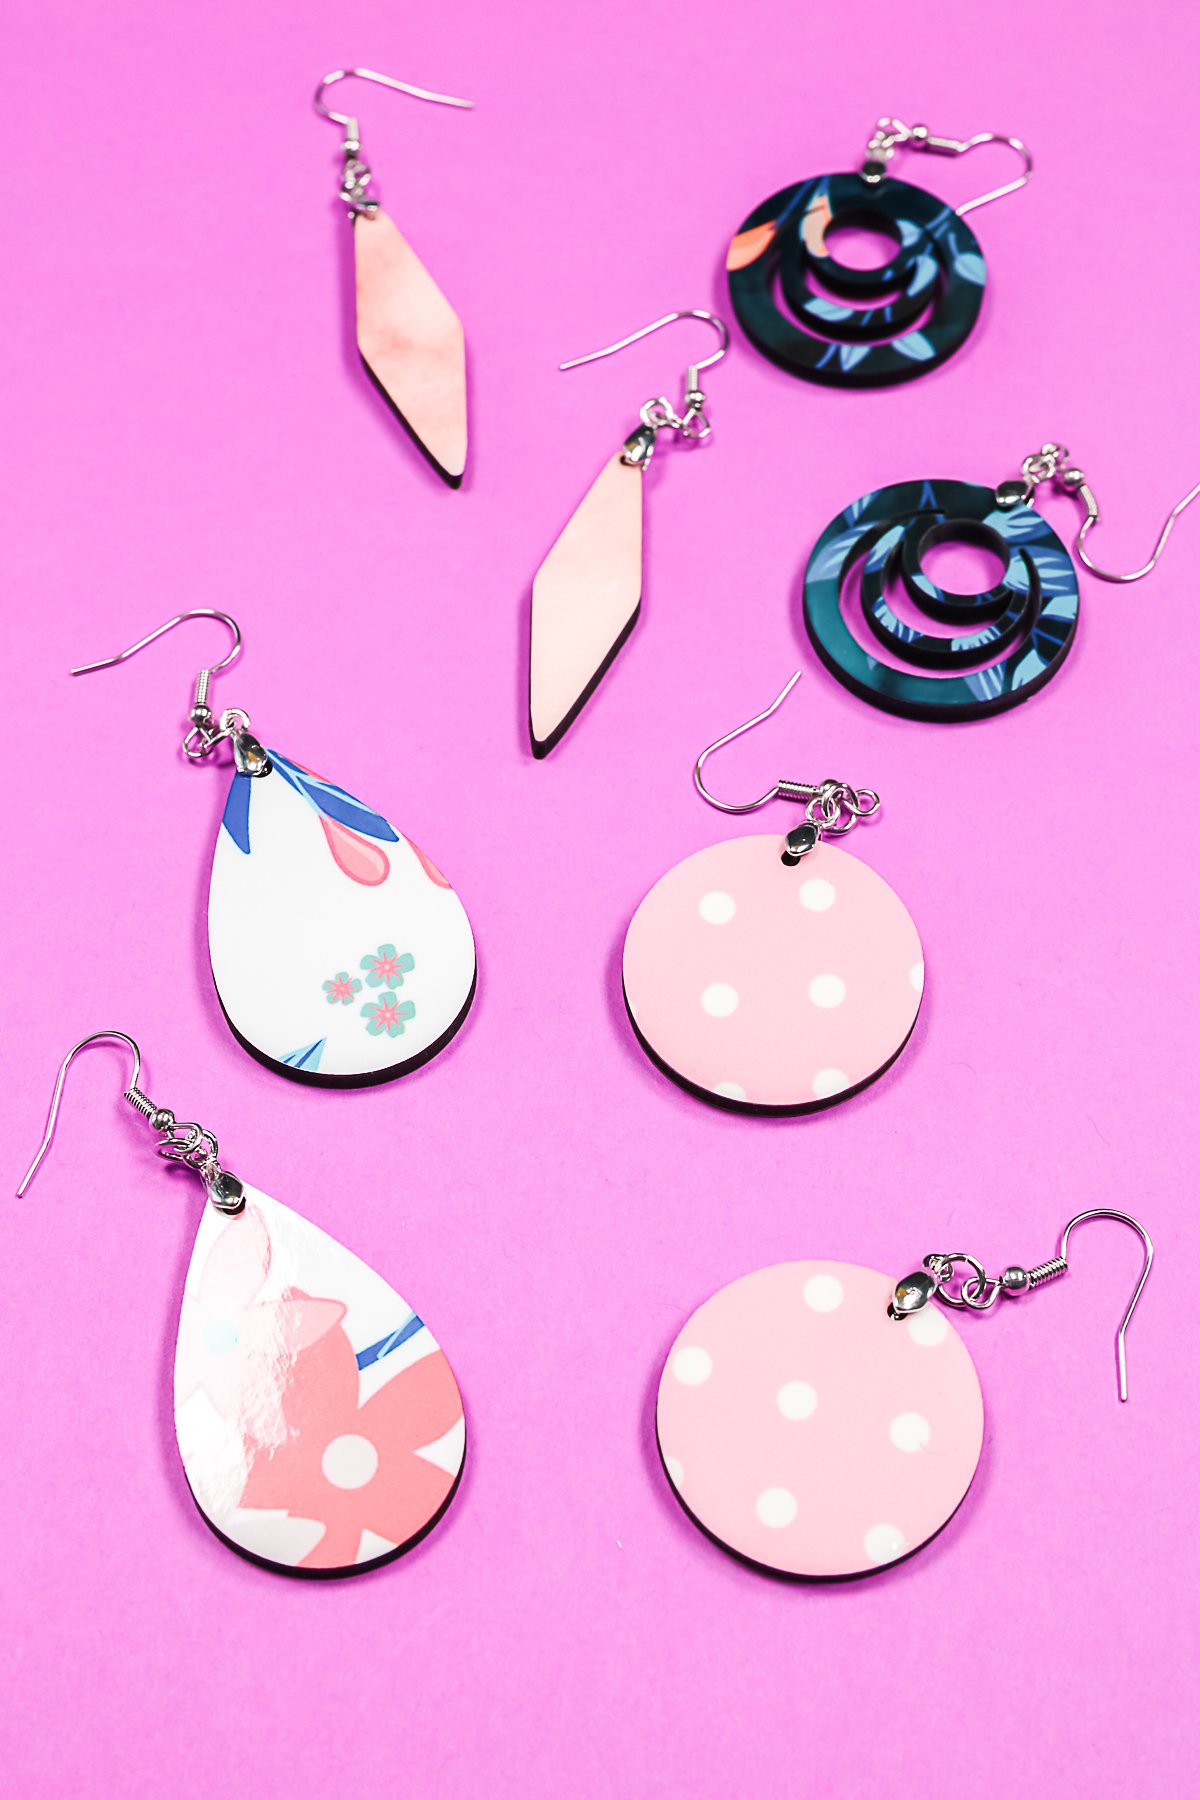 Sublimation Earrings Blanks, Sublimation Blank Products